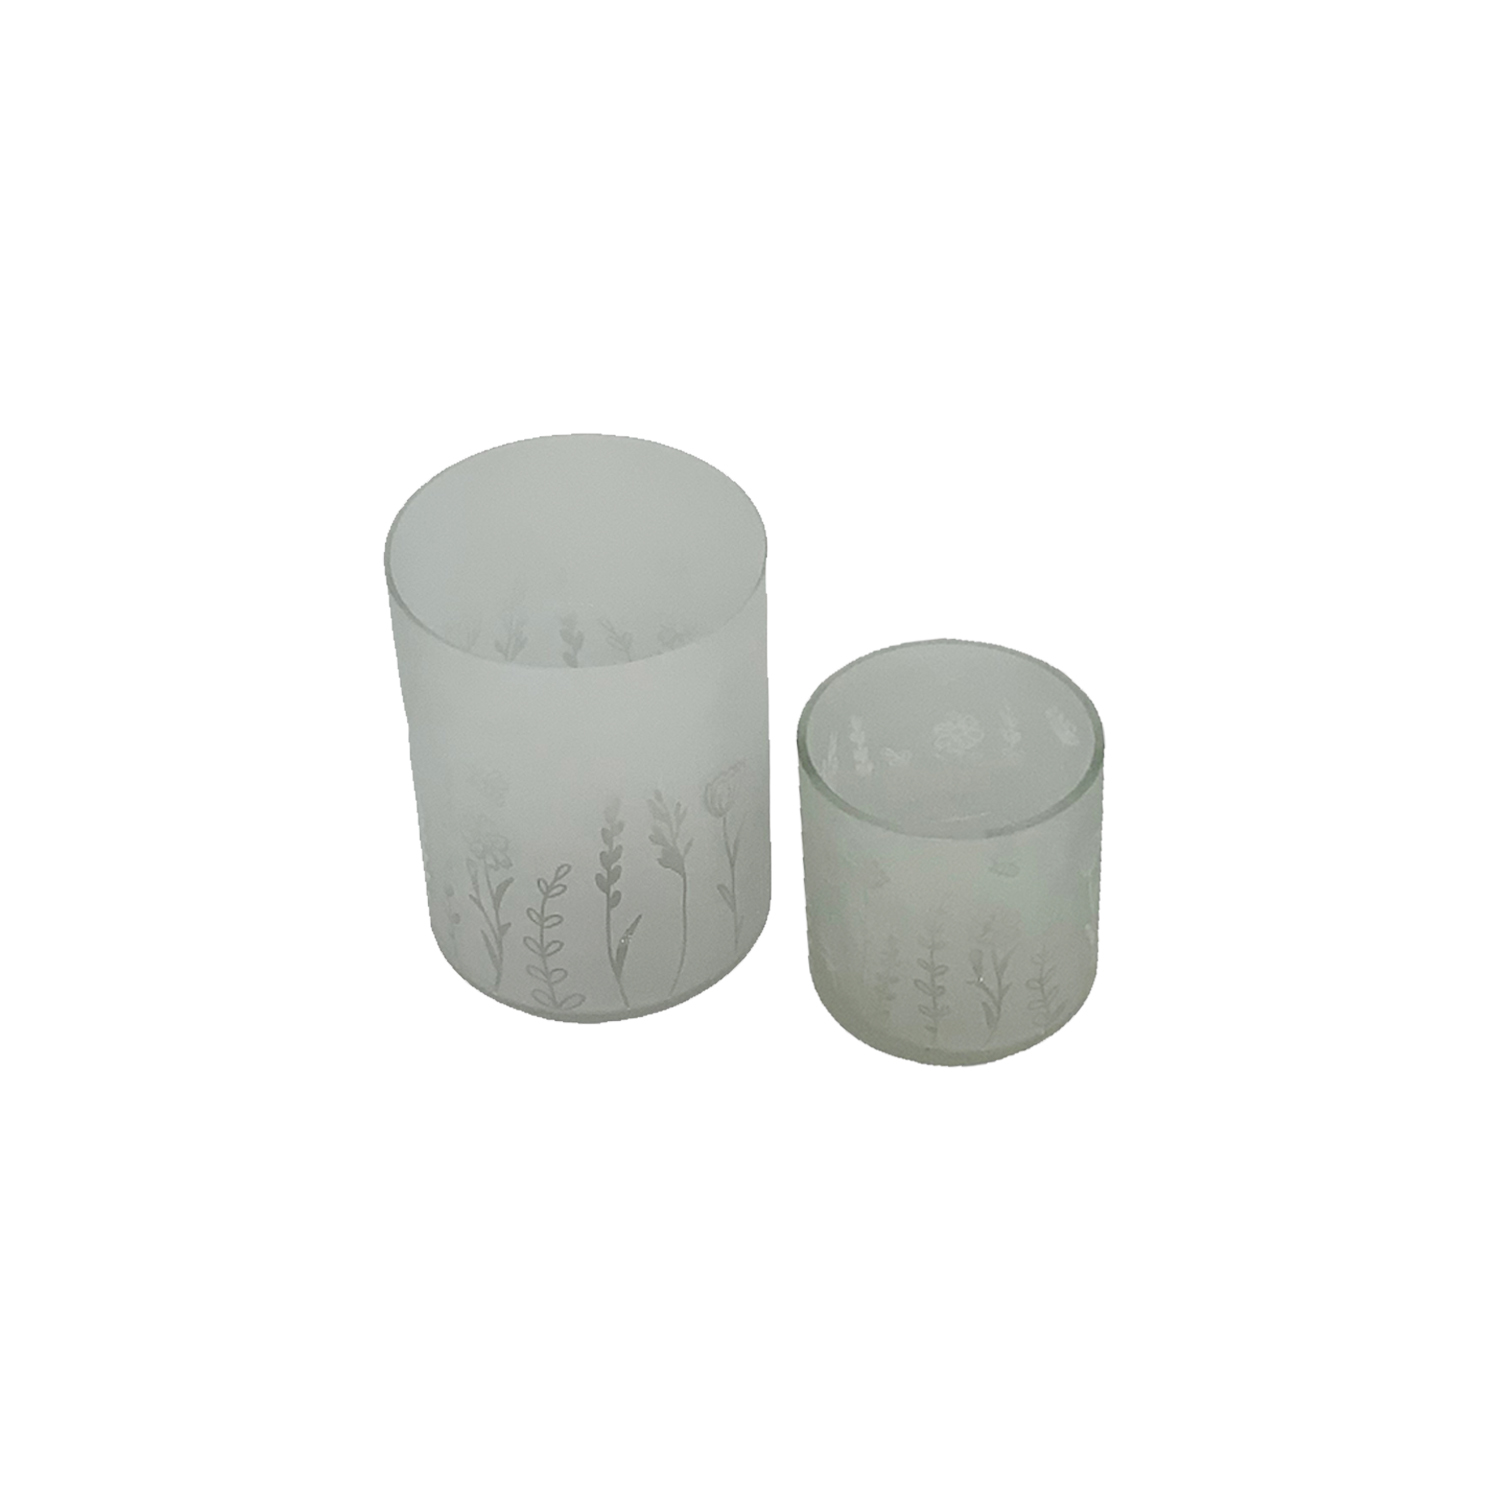 Wildflower Etched Glass Tealight Holders S/2 15/10 Gift